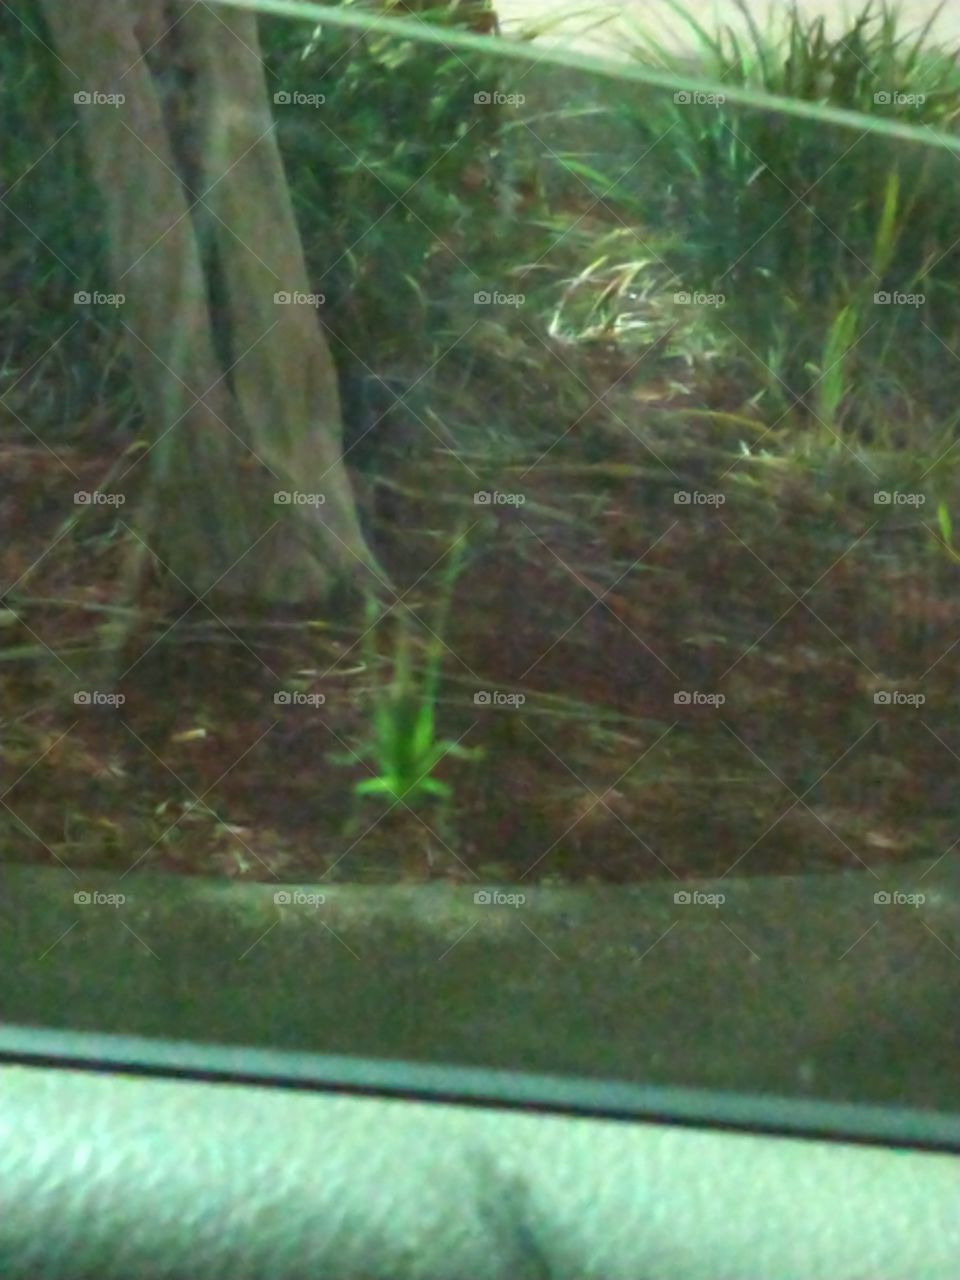 cool looking insect on the outside of the window of a vehicle